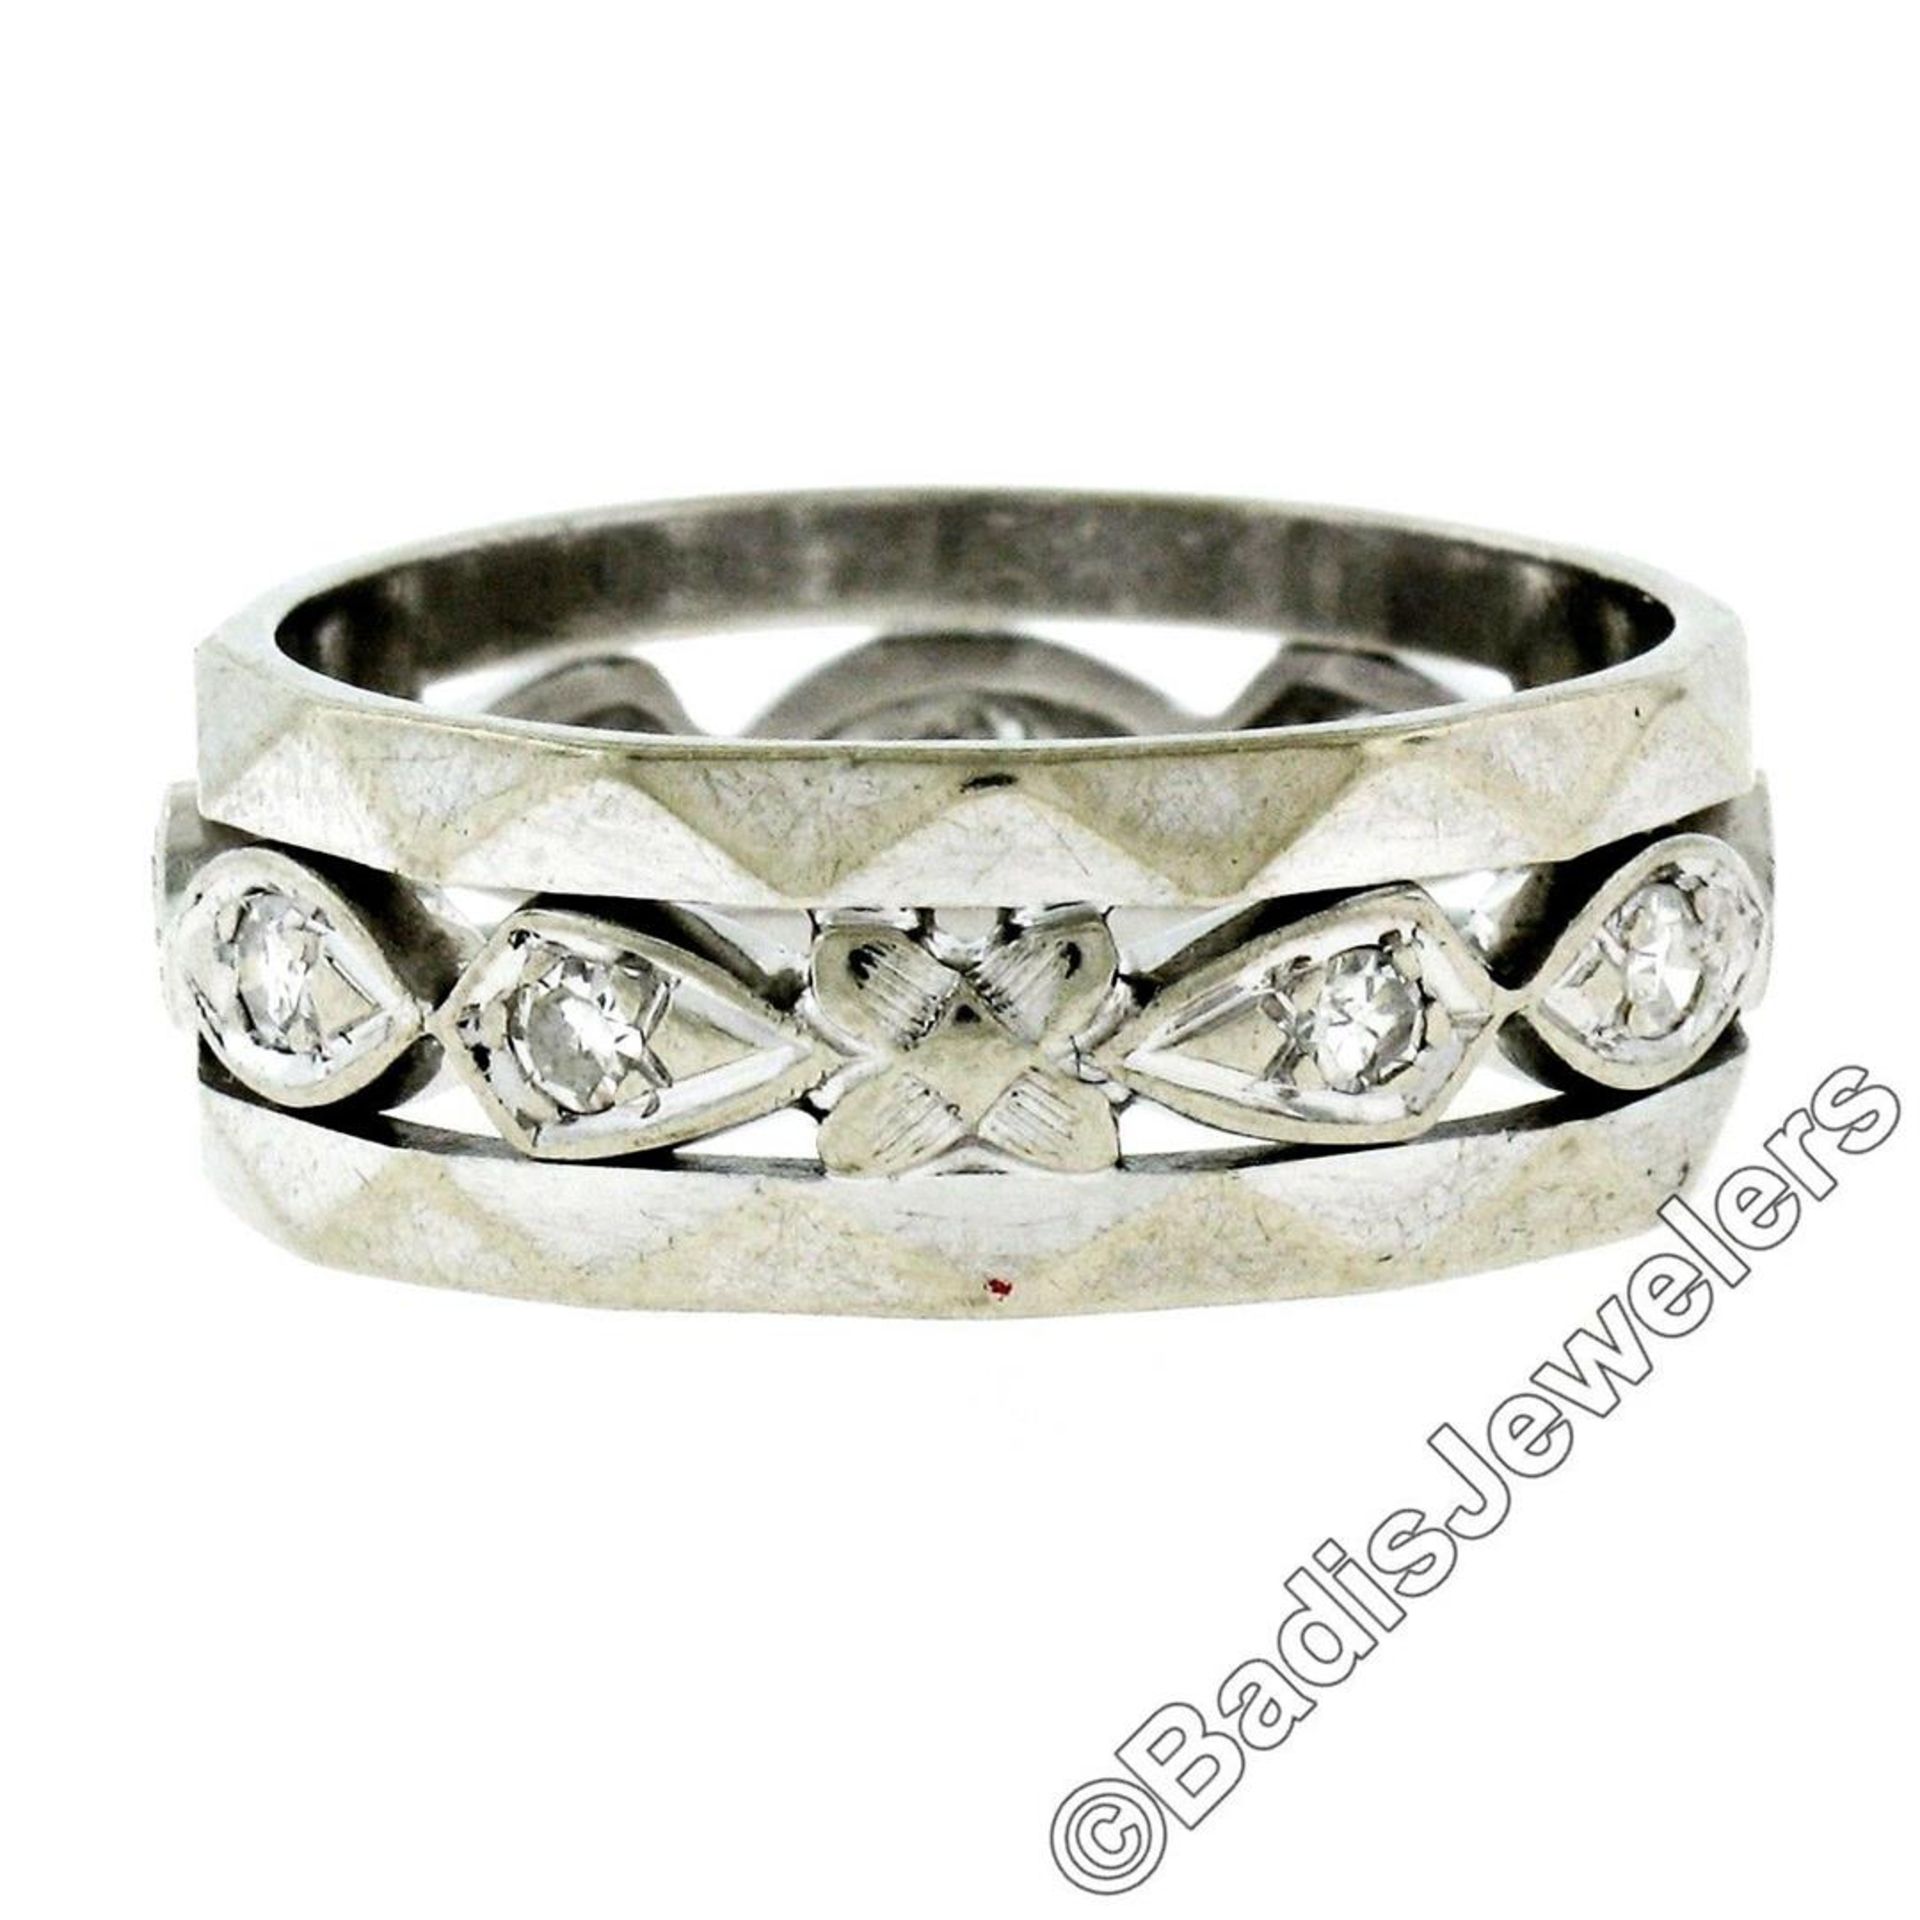 Antique 14kt White Gold 0.20ctw Diamond 7mm Eternity Band Ring - Image 5 of 8